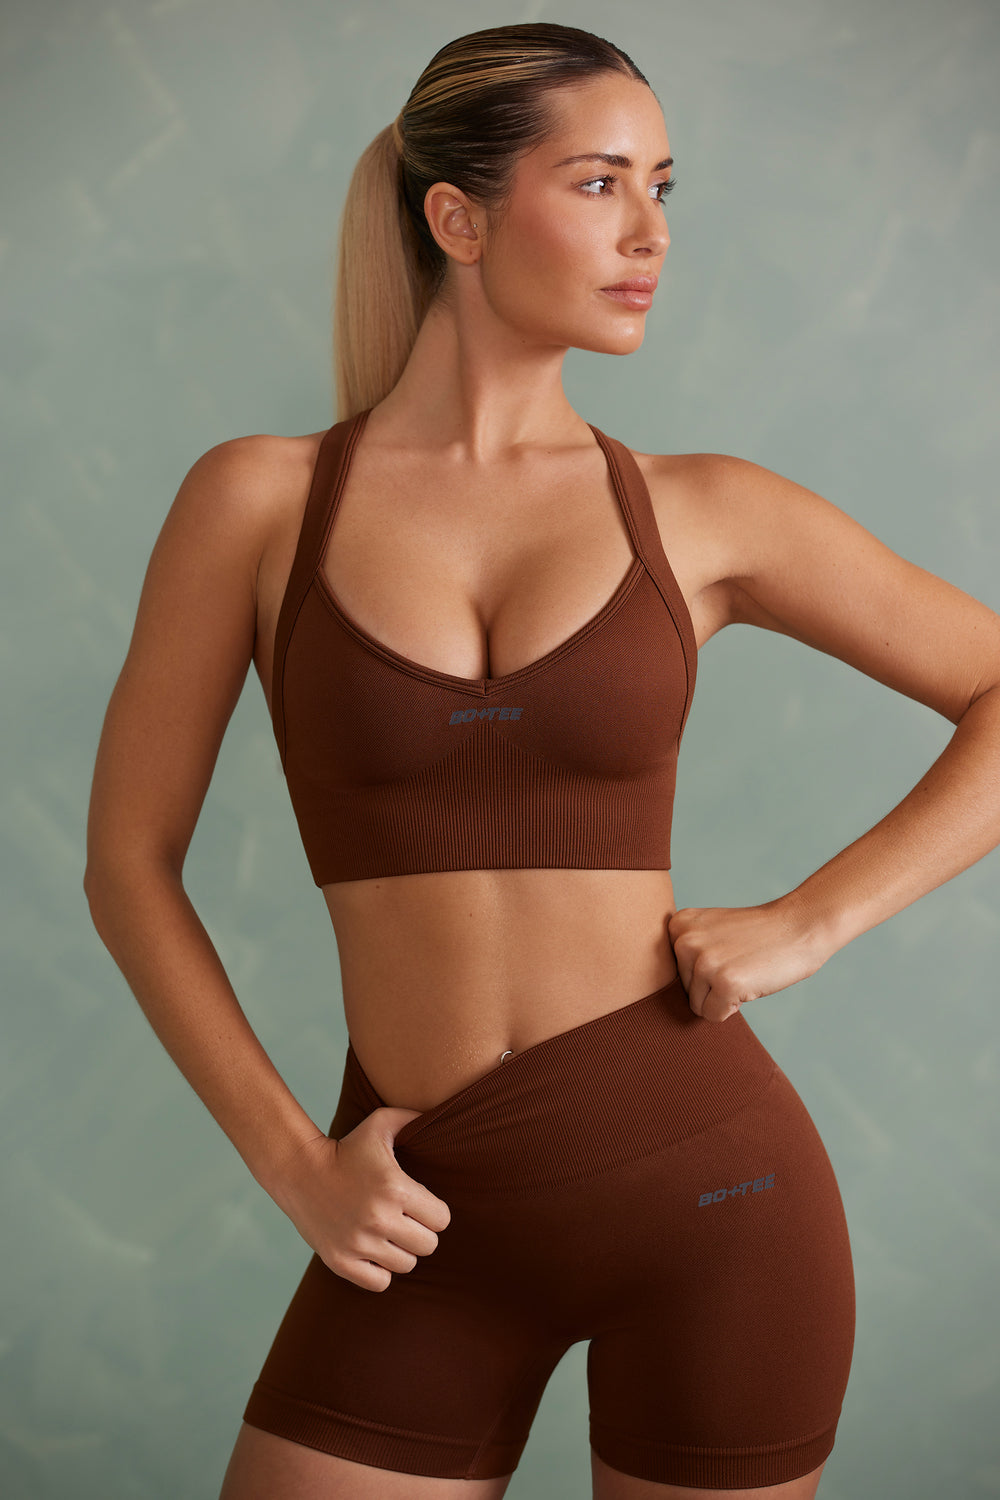 Hoxton Haus cut out sports bra in chocolate brown - ShopStyle